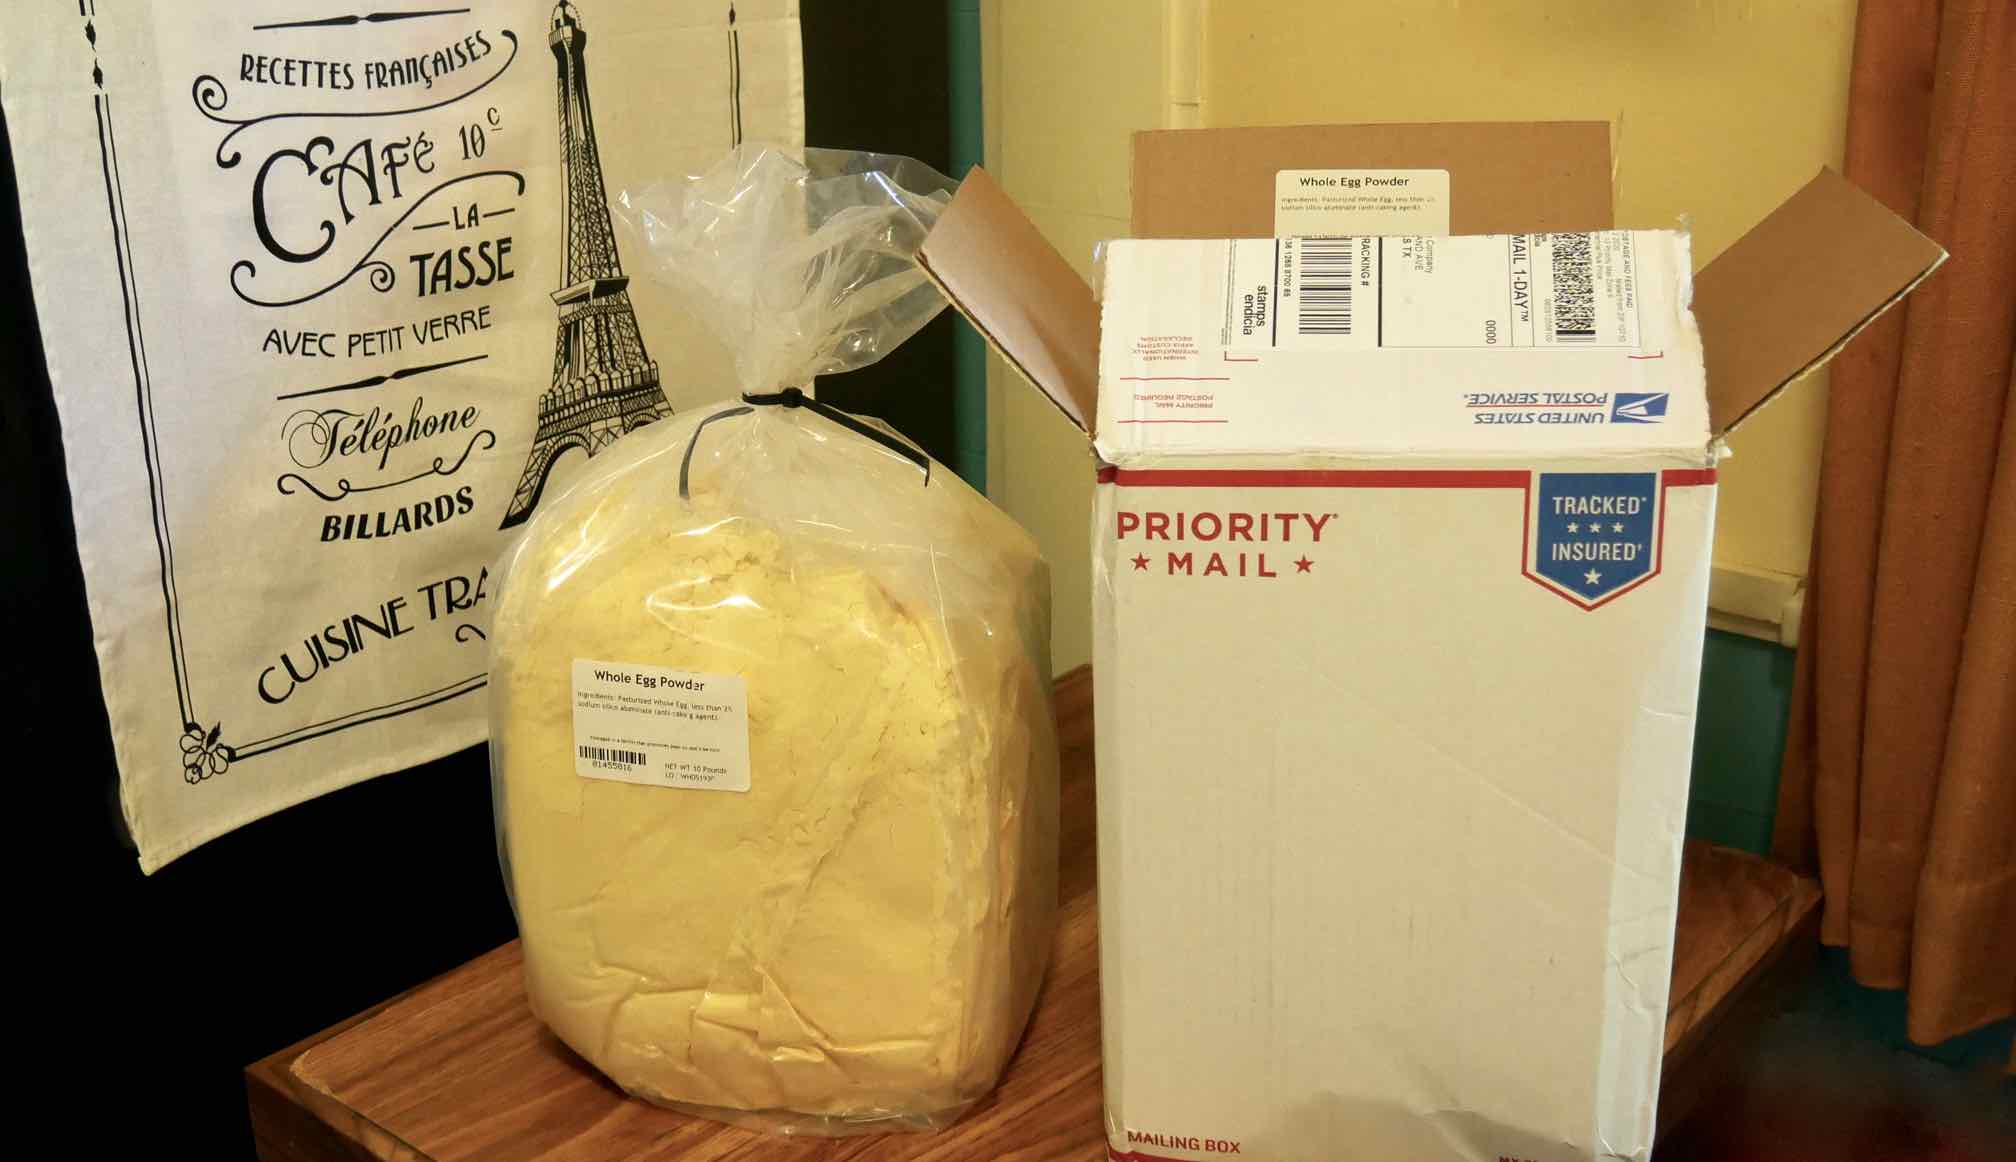 10 pounds of dried egg powder in plastic bag and the Priority Mail box in which it was shipped